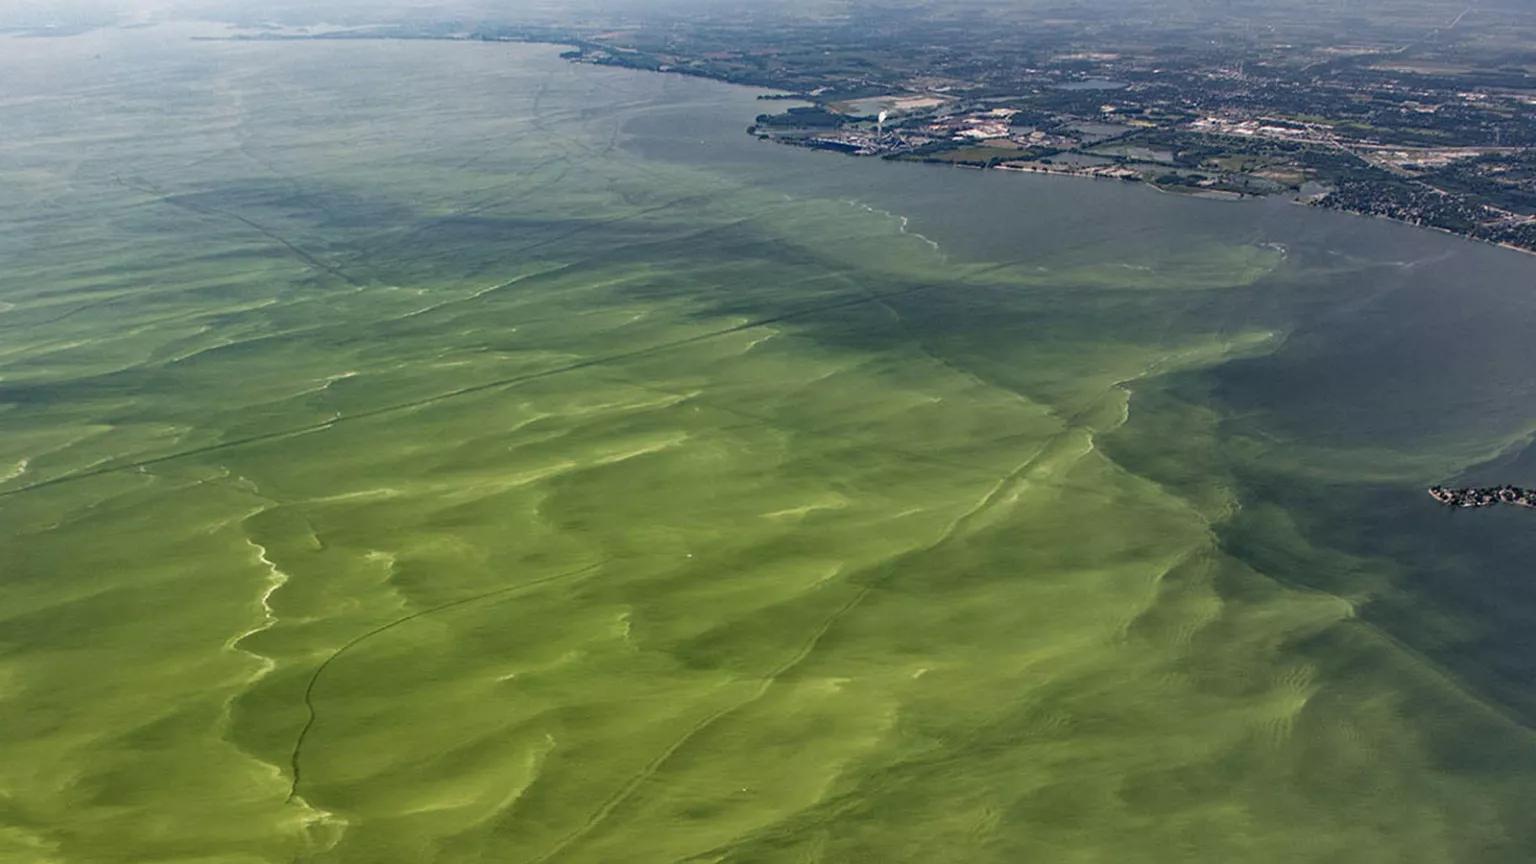 An aerial view of deep green waters approaching the shoreline near a city